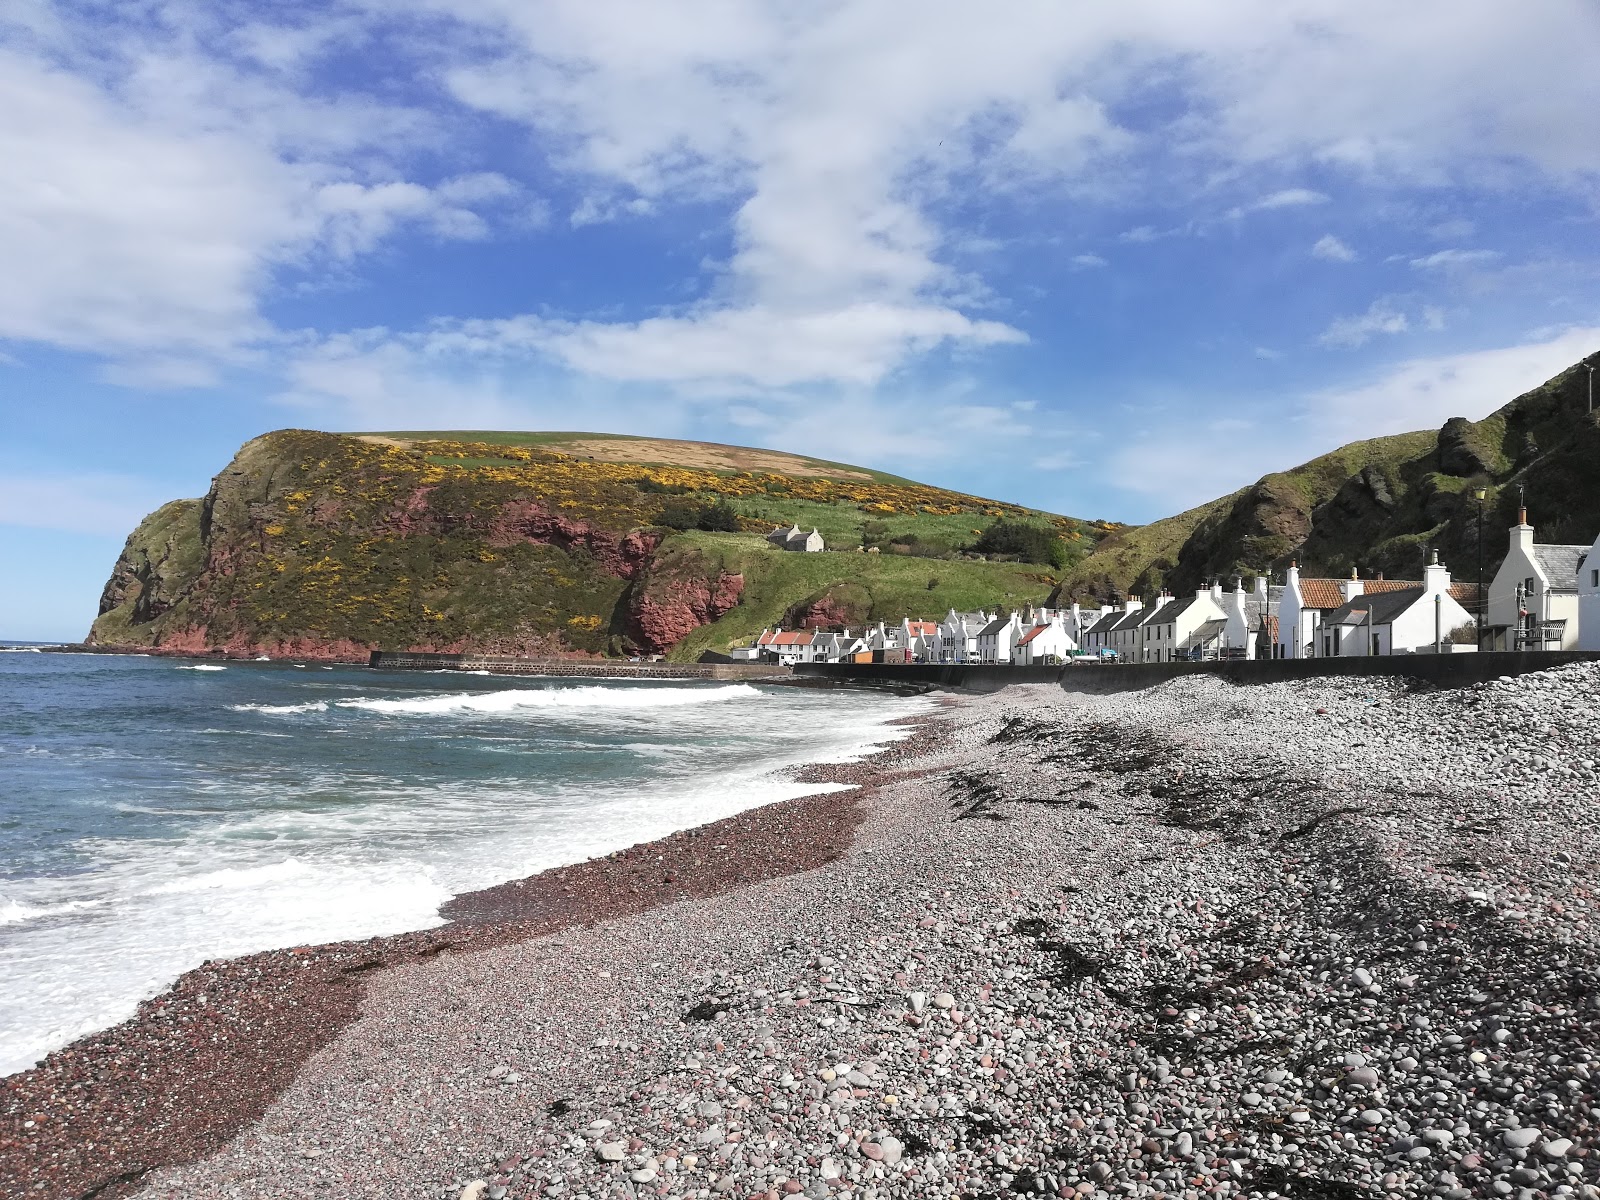 Photo of Pennan Bay Beach with gray pebble surface